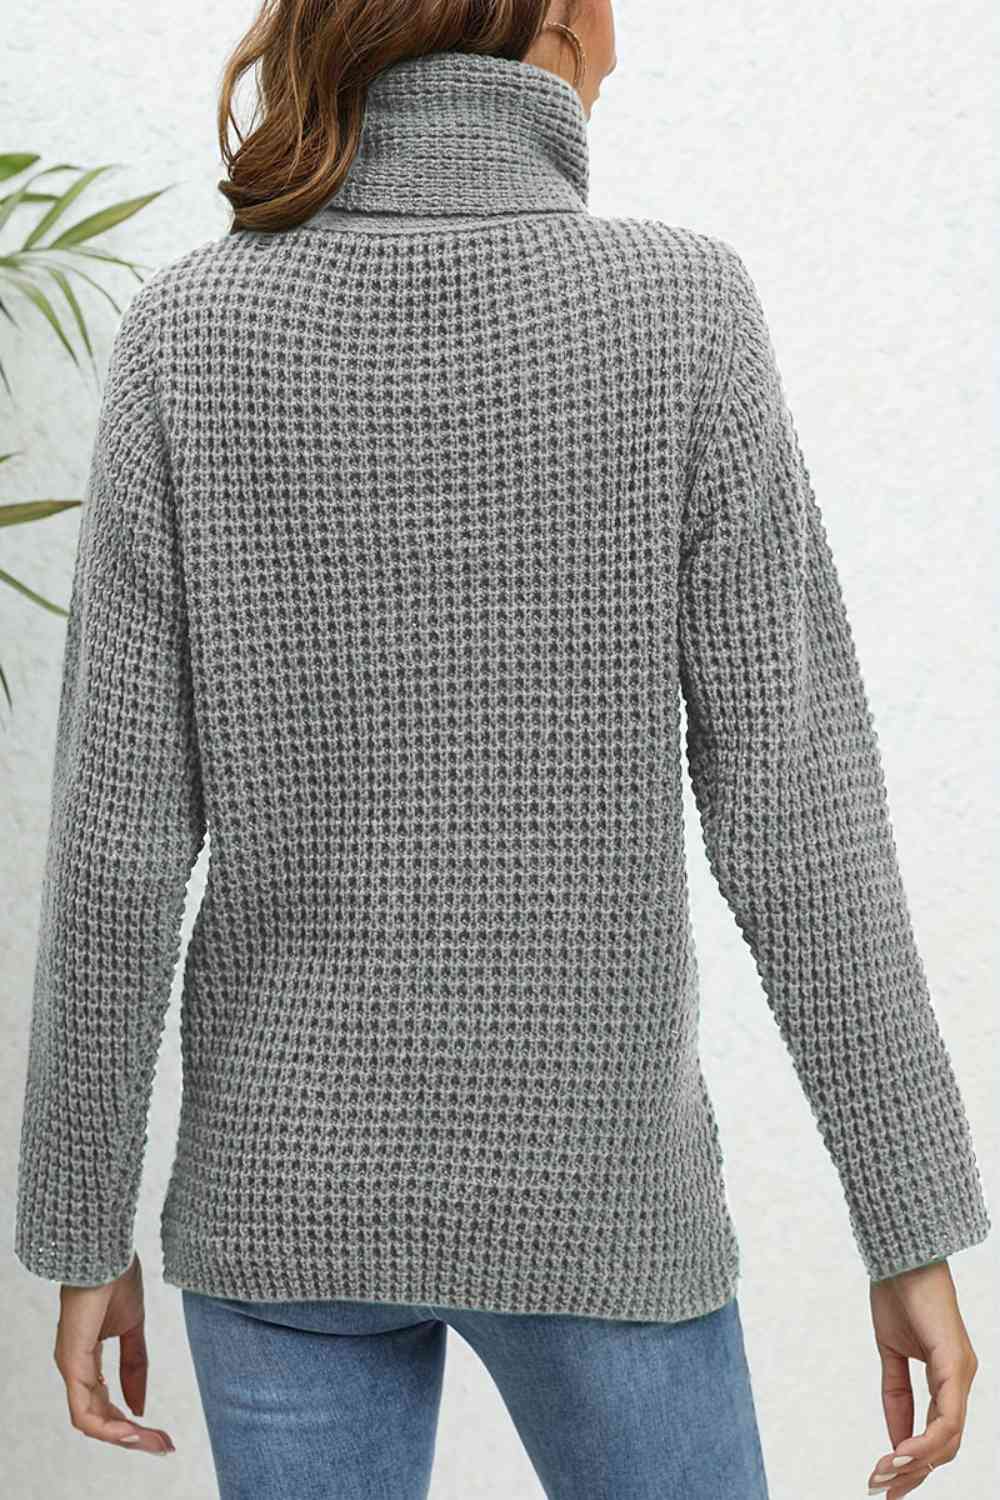 Buttoned Turtleneck Long Sleeve Sweater - Guy Christopher